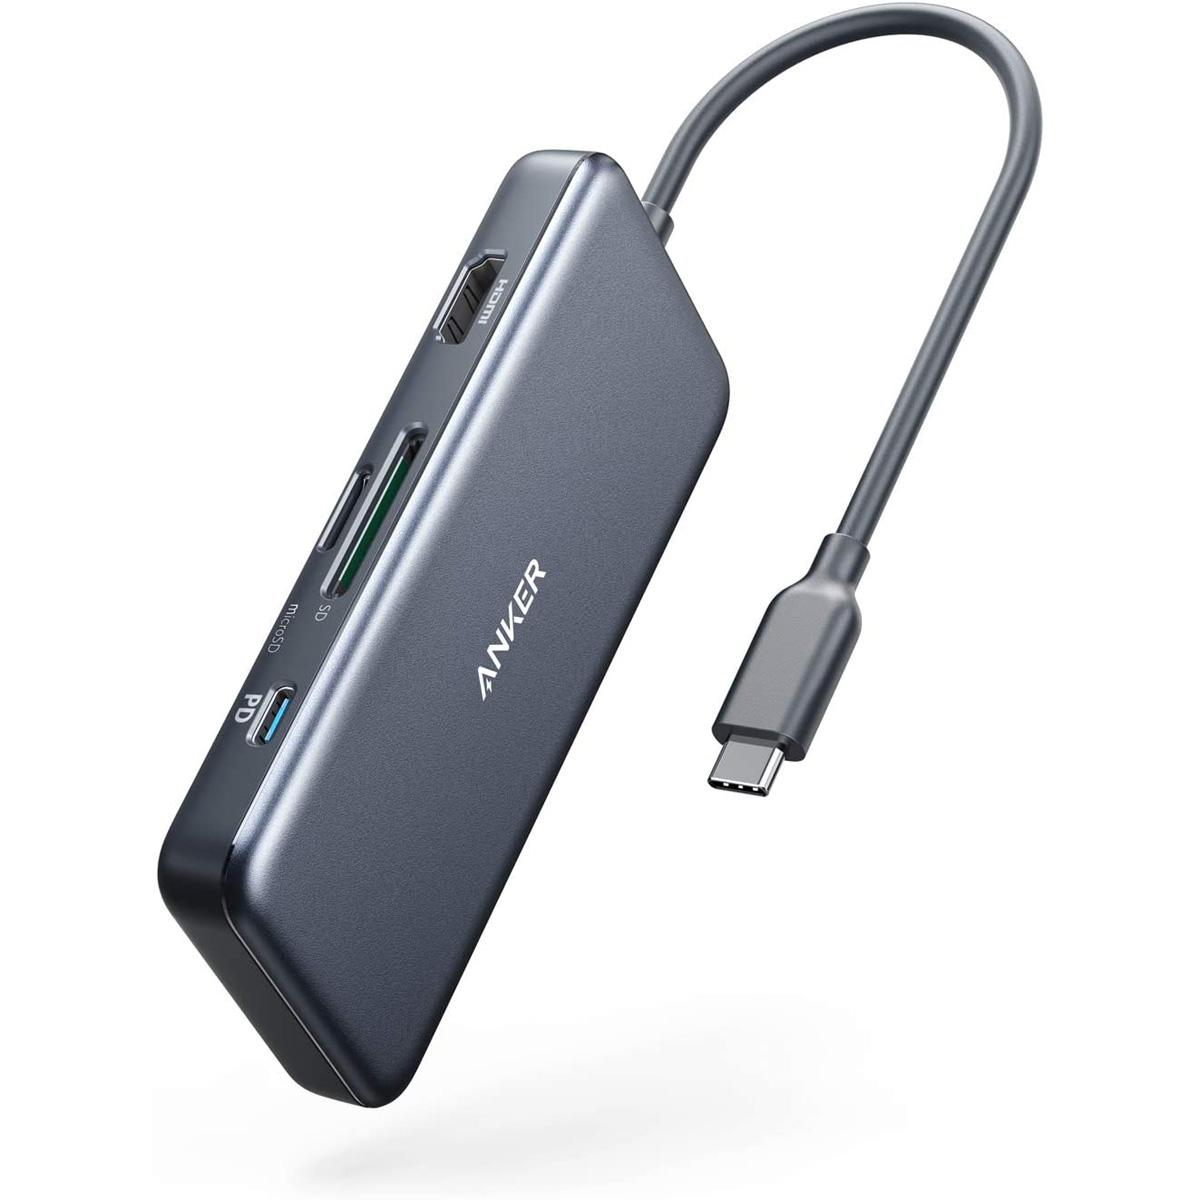 Anker 7-in-1 USB C to HDMI Hub and Memory Card Reader for $21.66